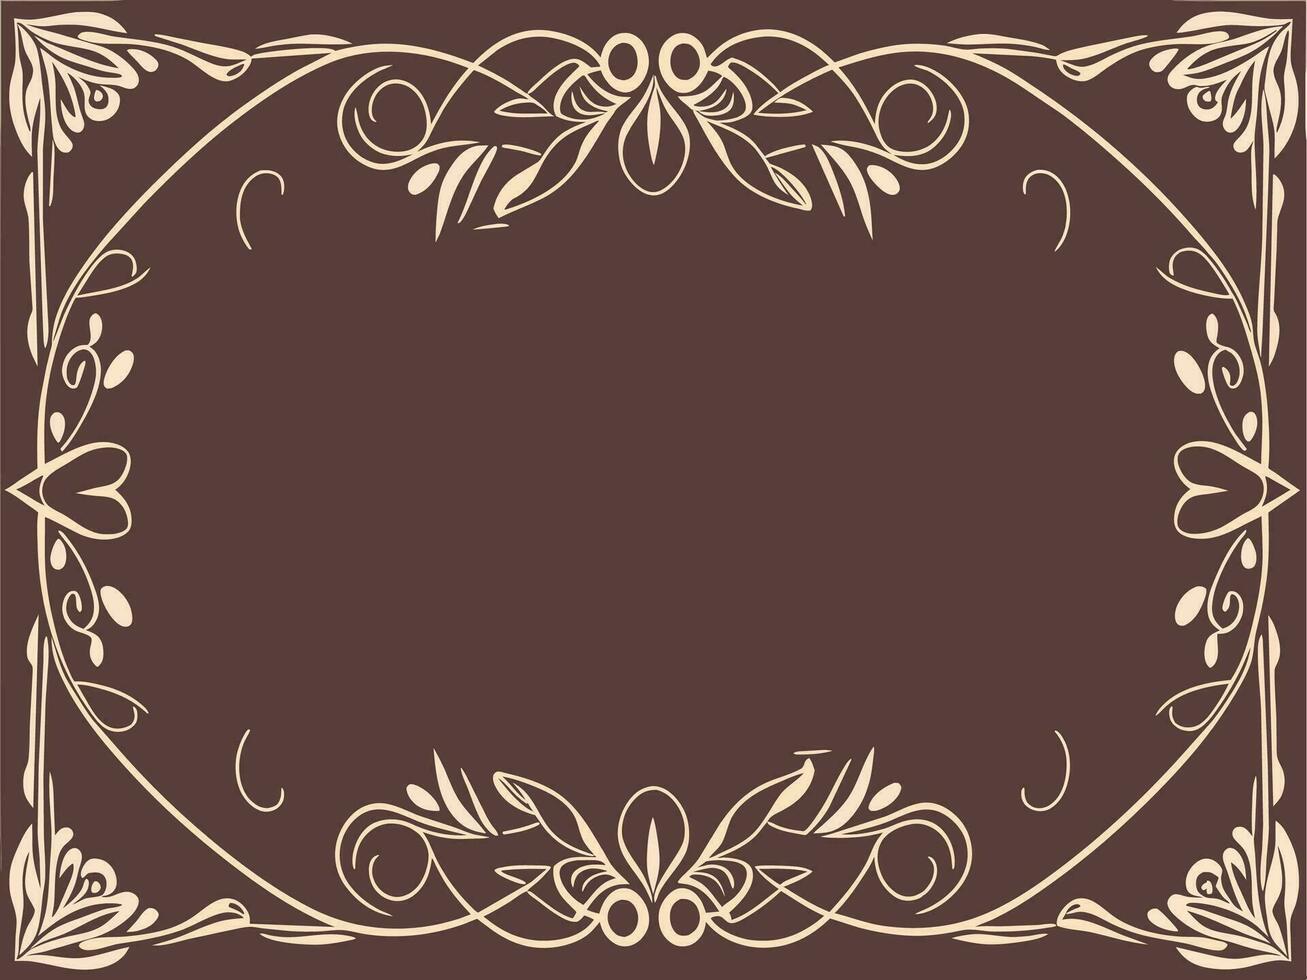 a decorative frame with a floral design on a brown background vector